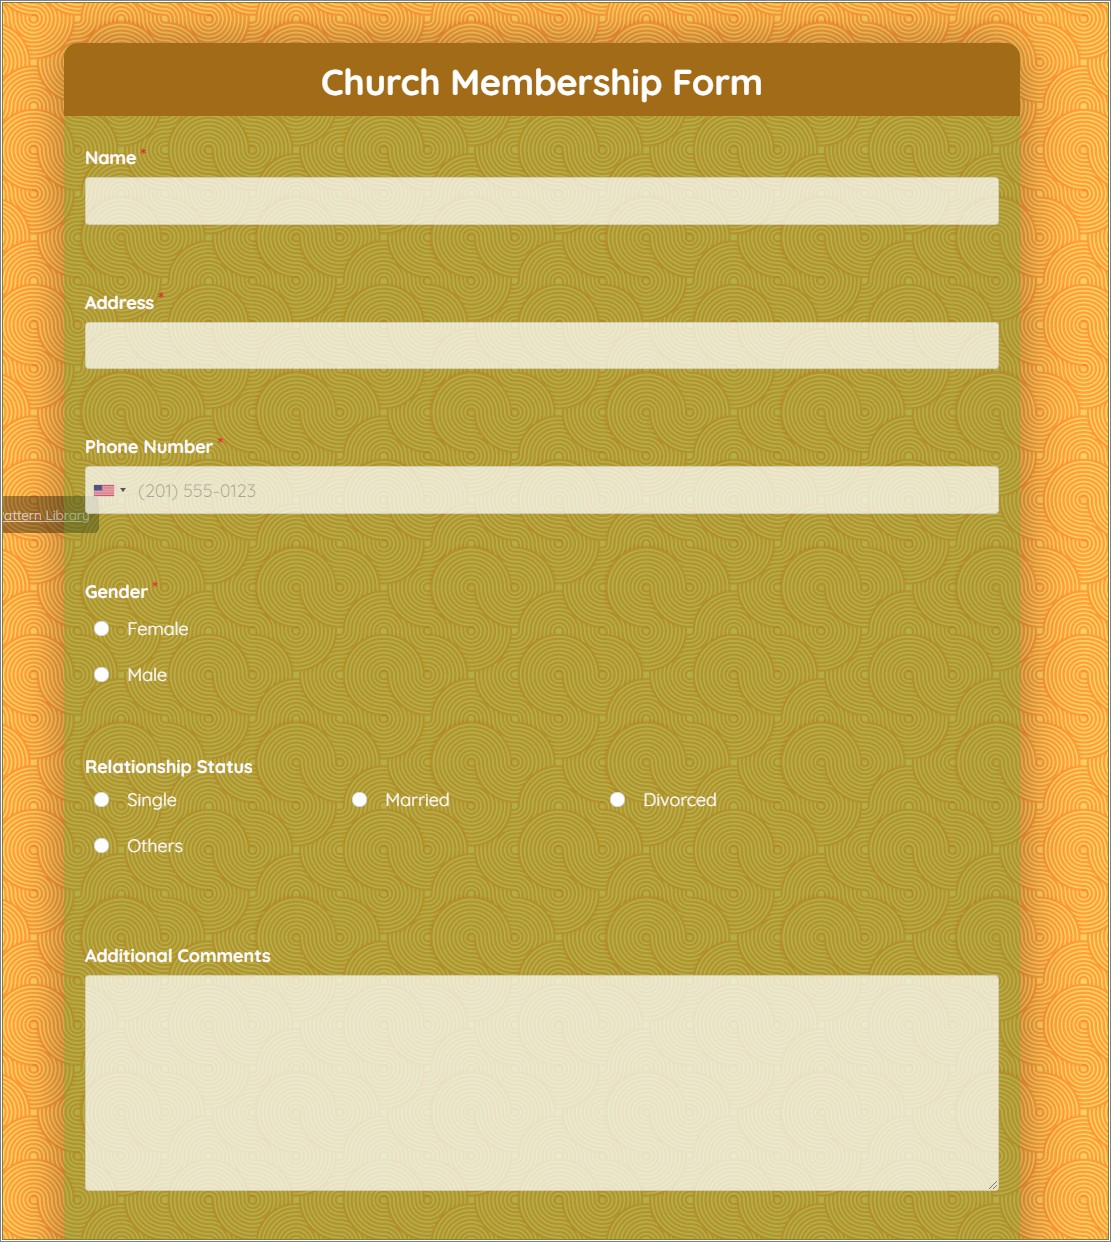 Free Purchase Requisition Form Template For Church